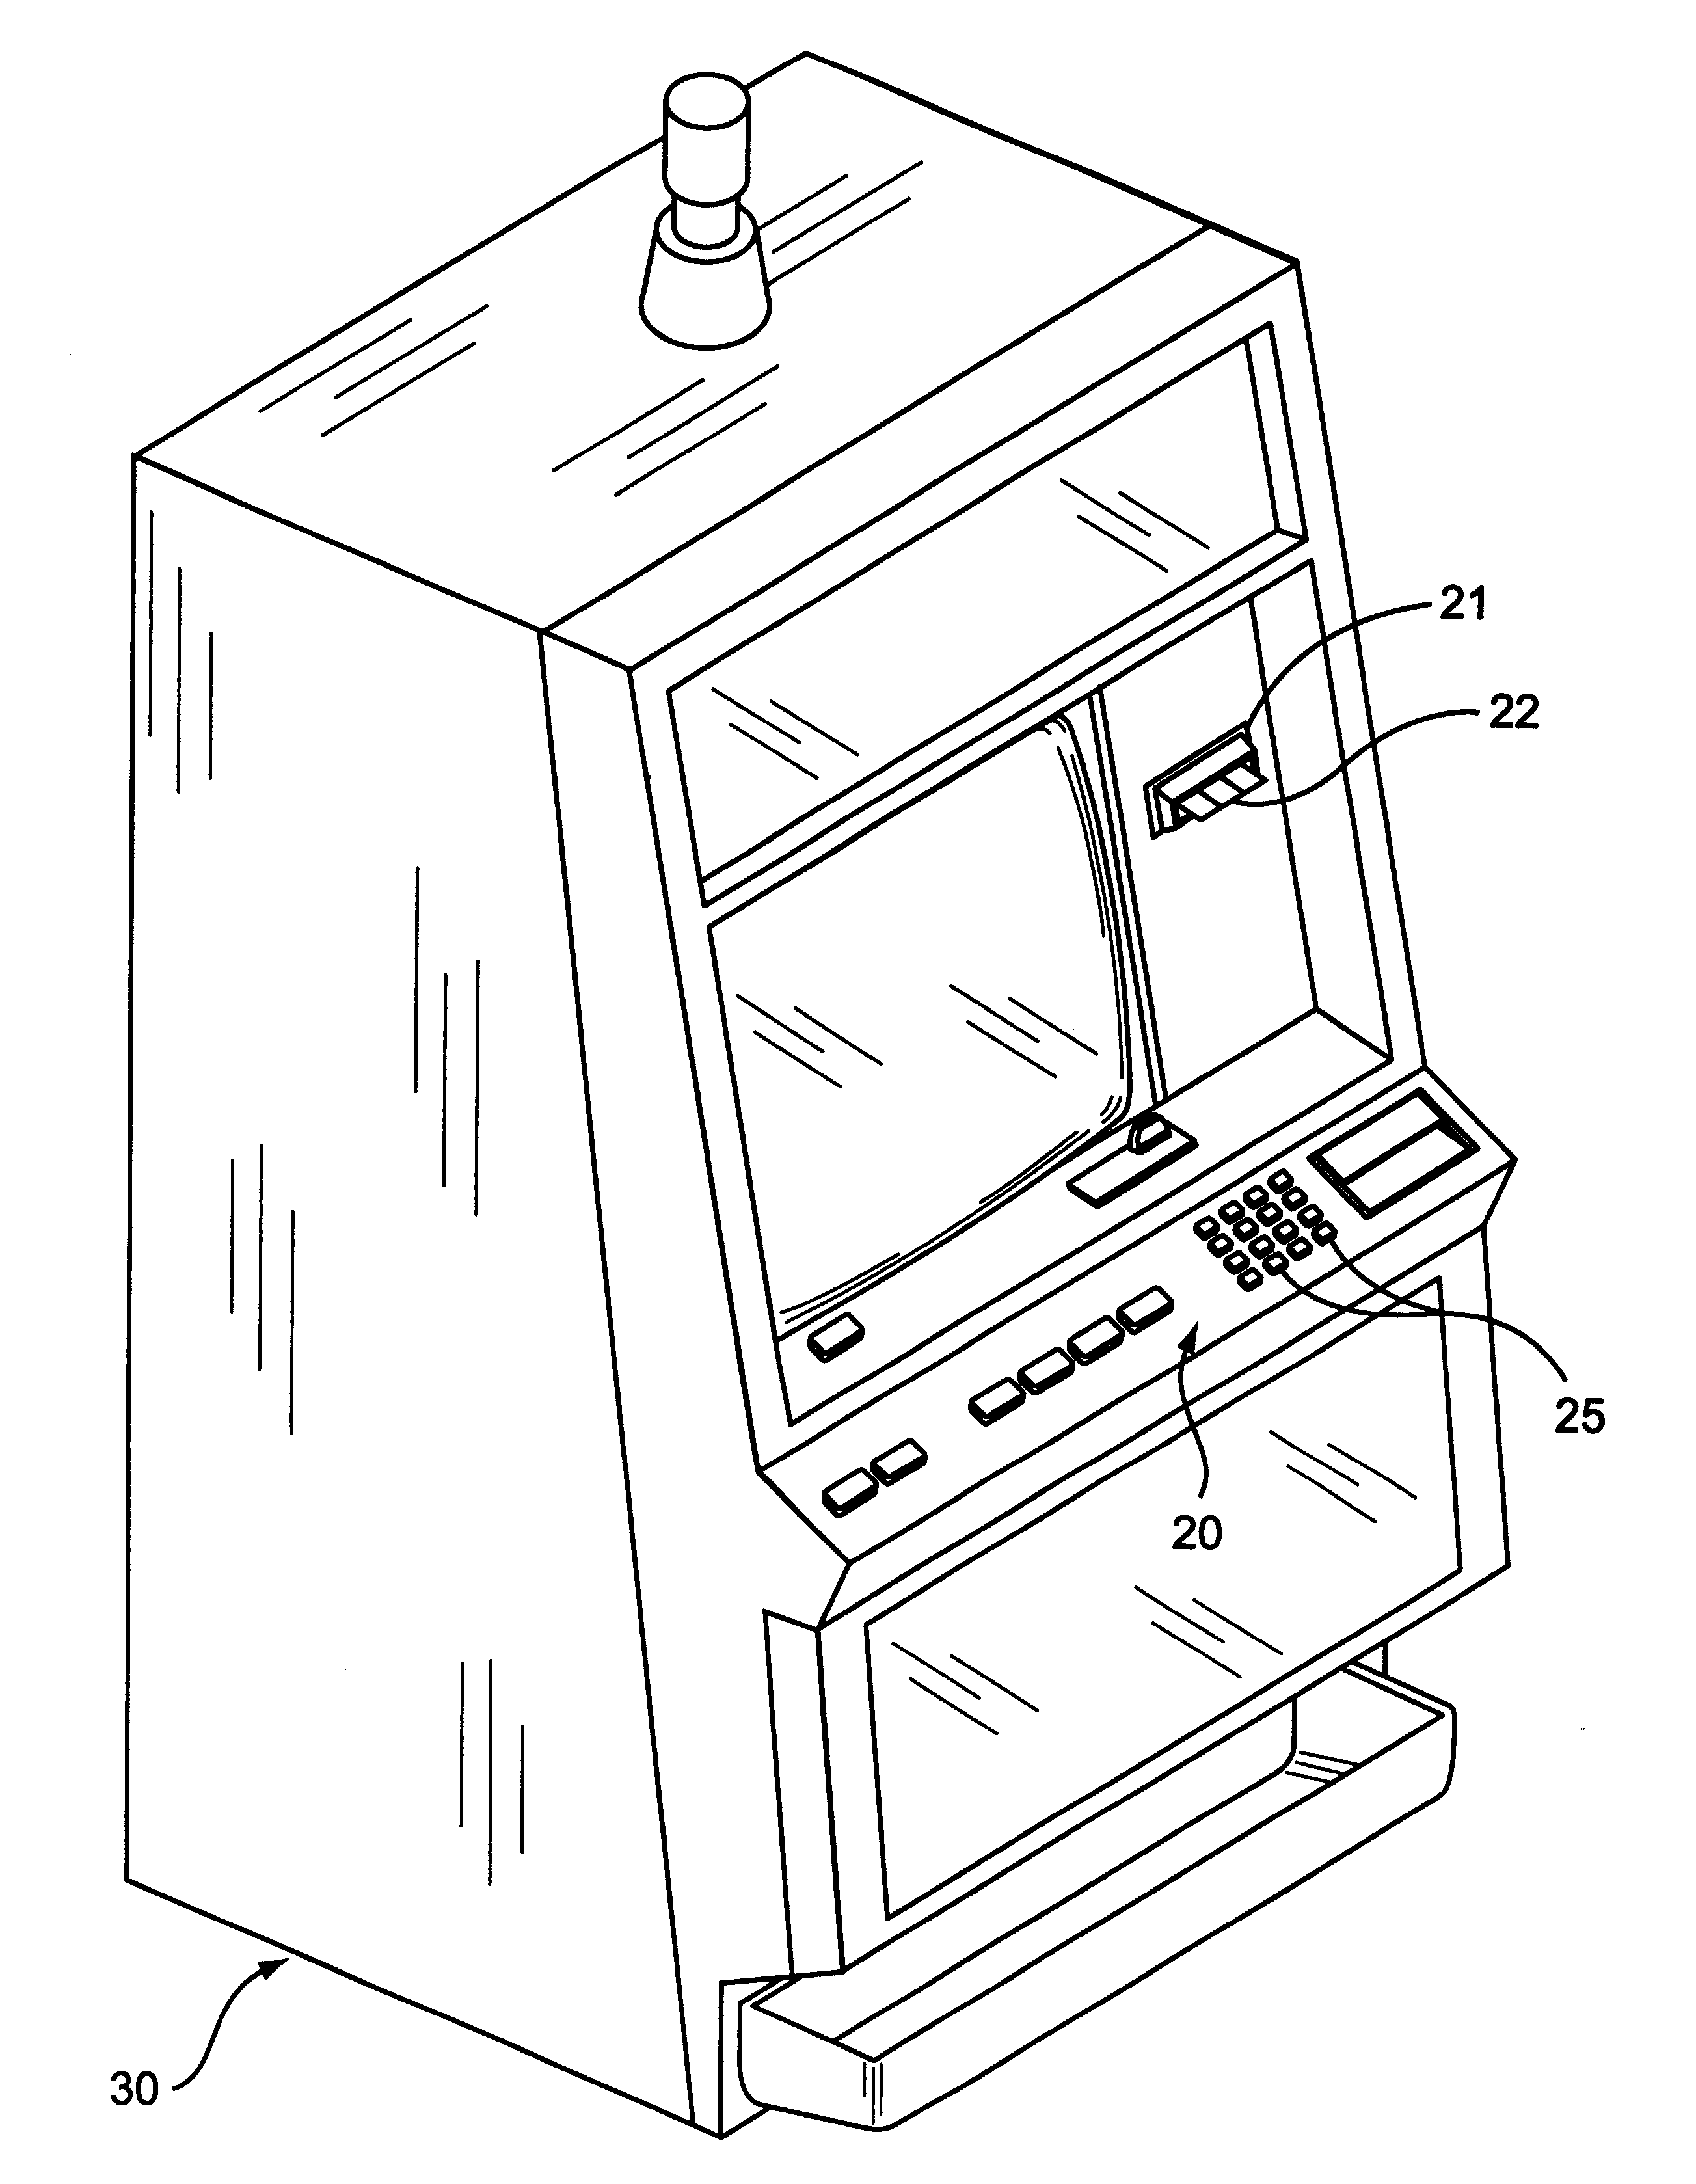 Lighted keypad assembly and method for a player tracking system